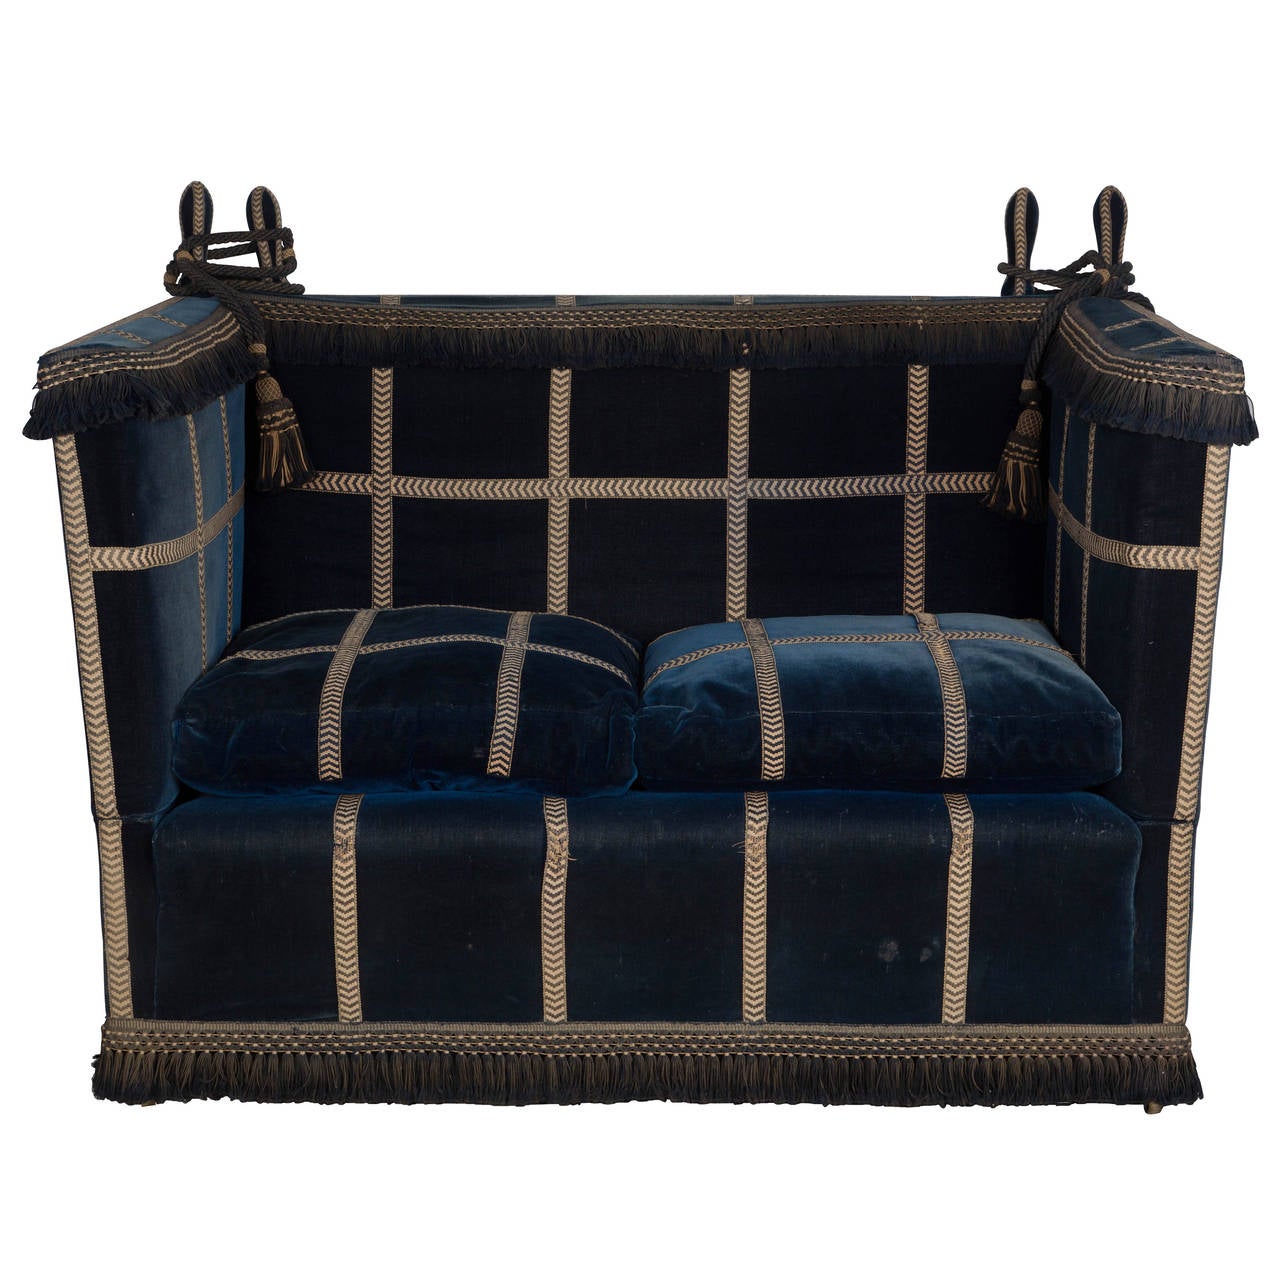 Edwardian small knole settee in original velvet upholstery and braiding. Attributed to Hamptons, by appointment suppliers of upholstery to her majesty queen Mary, Buckingham Palace.